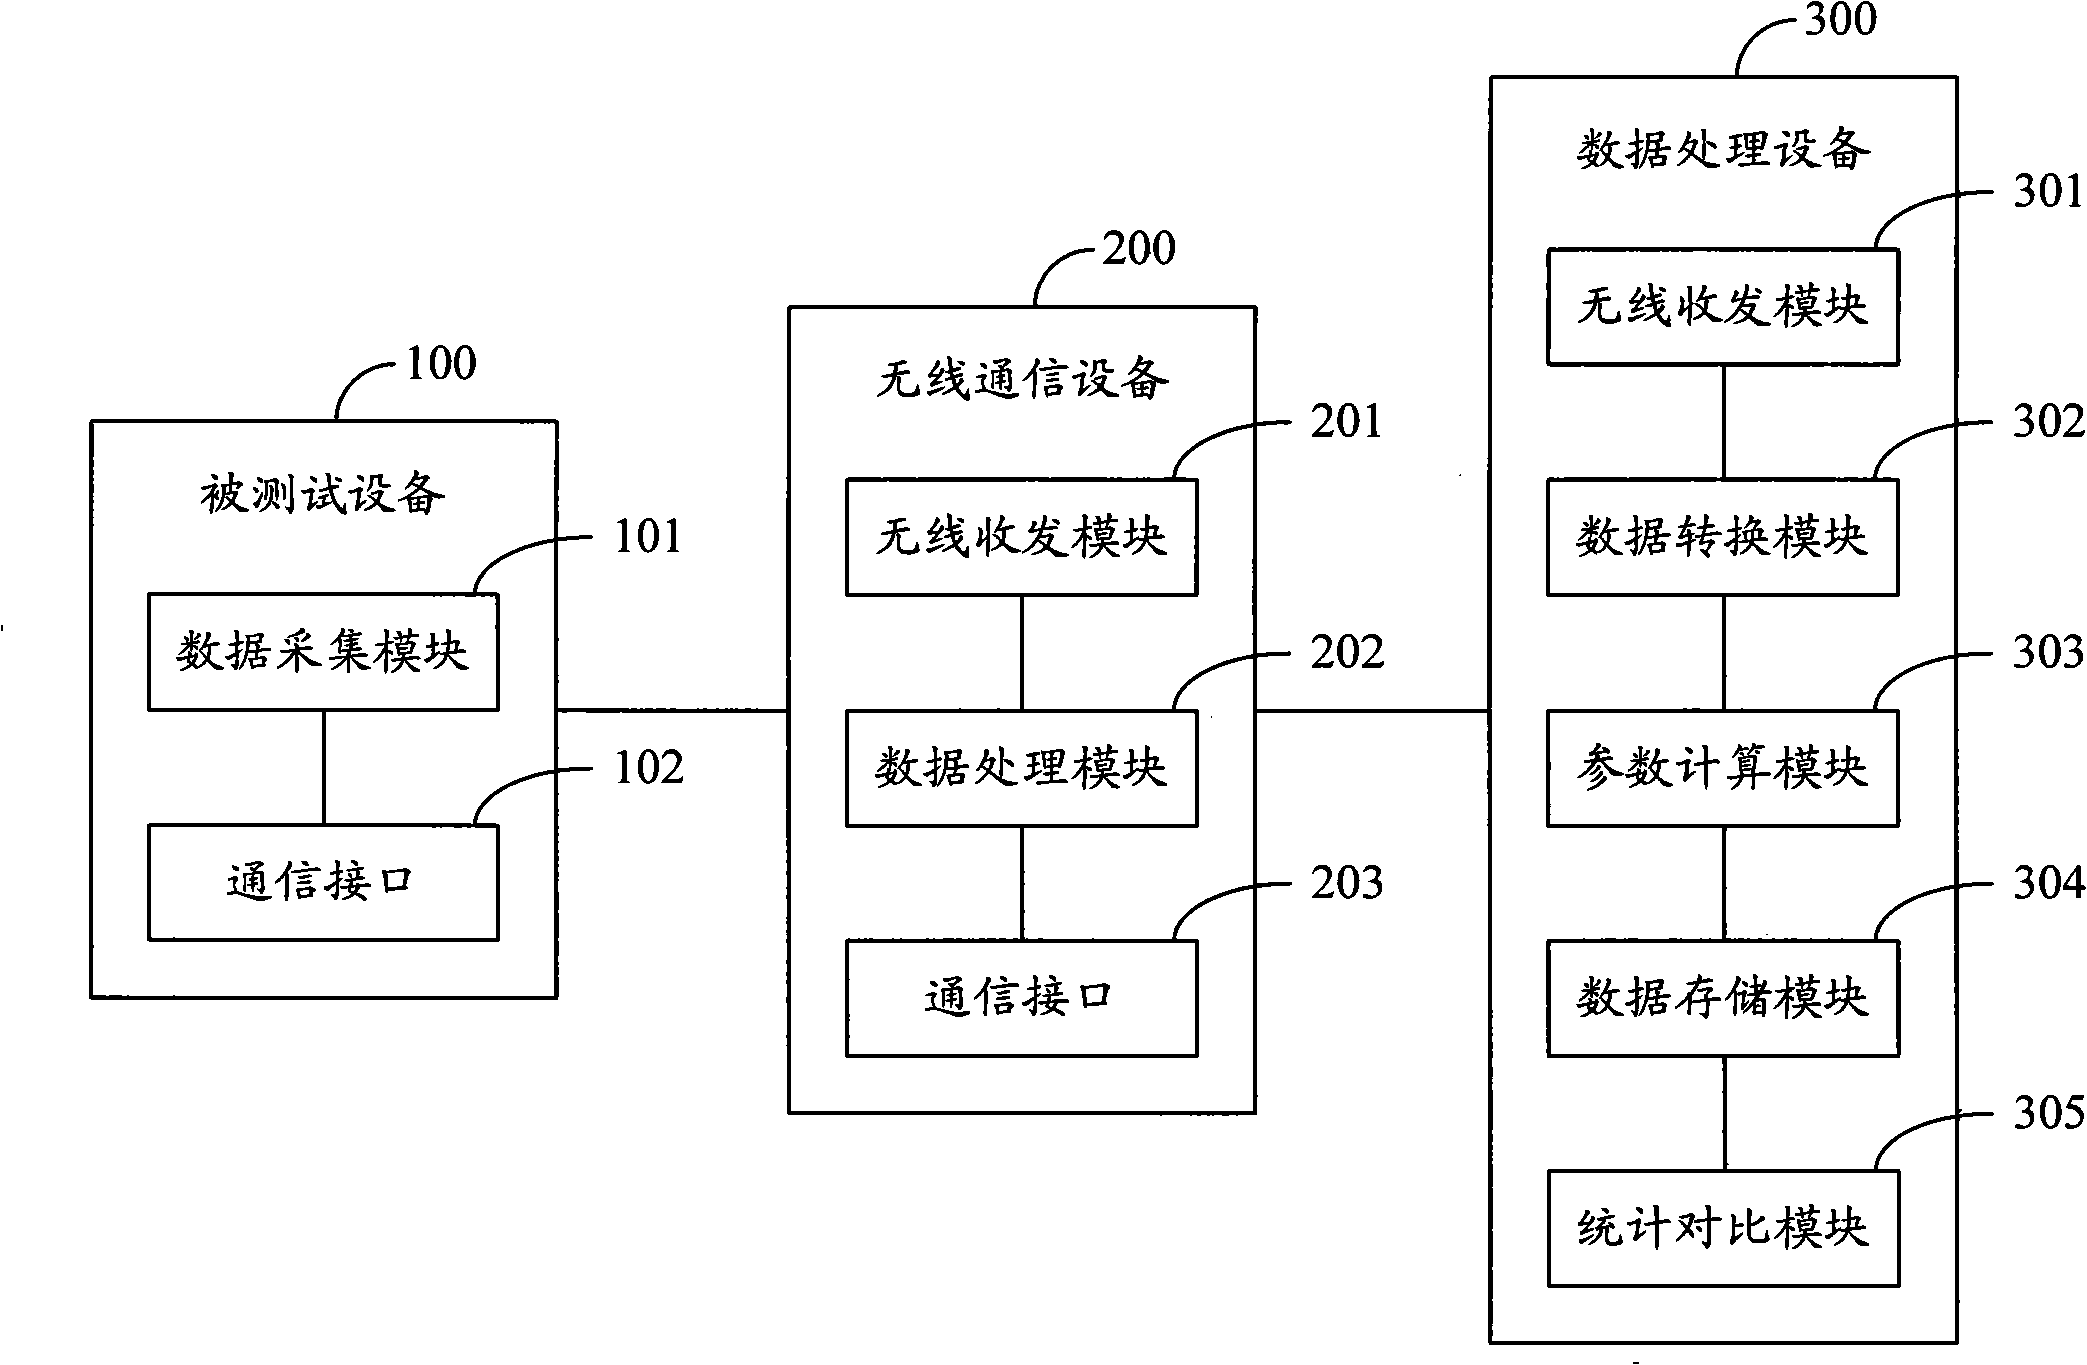 Equipment test system and method